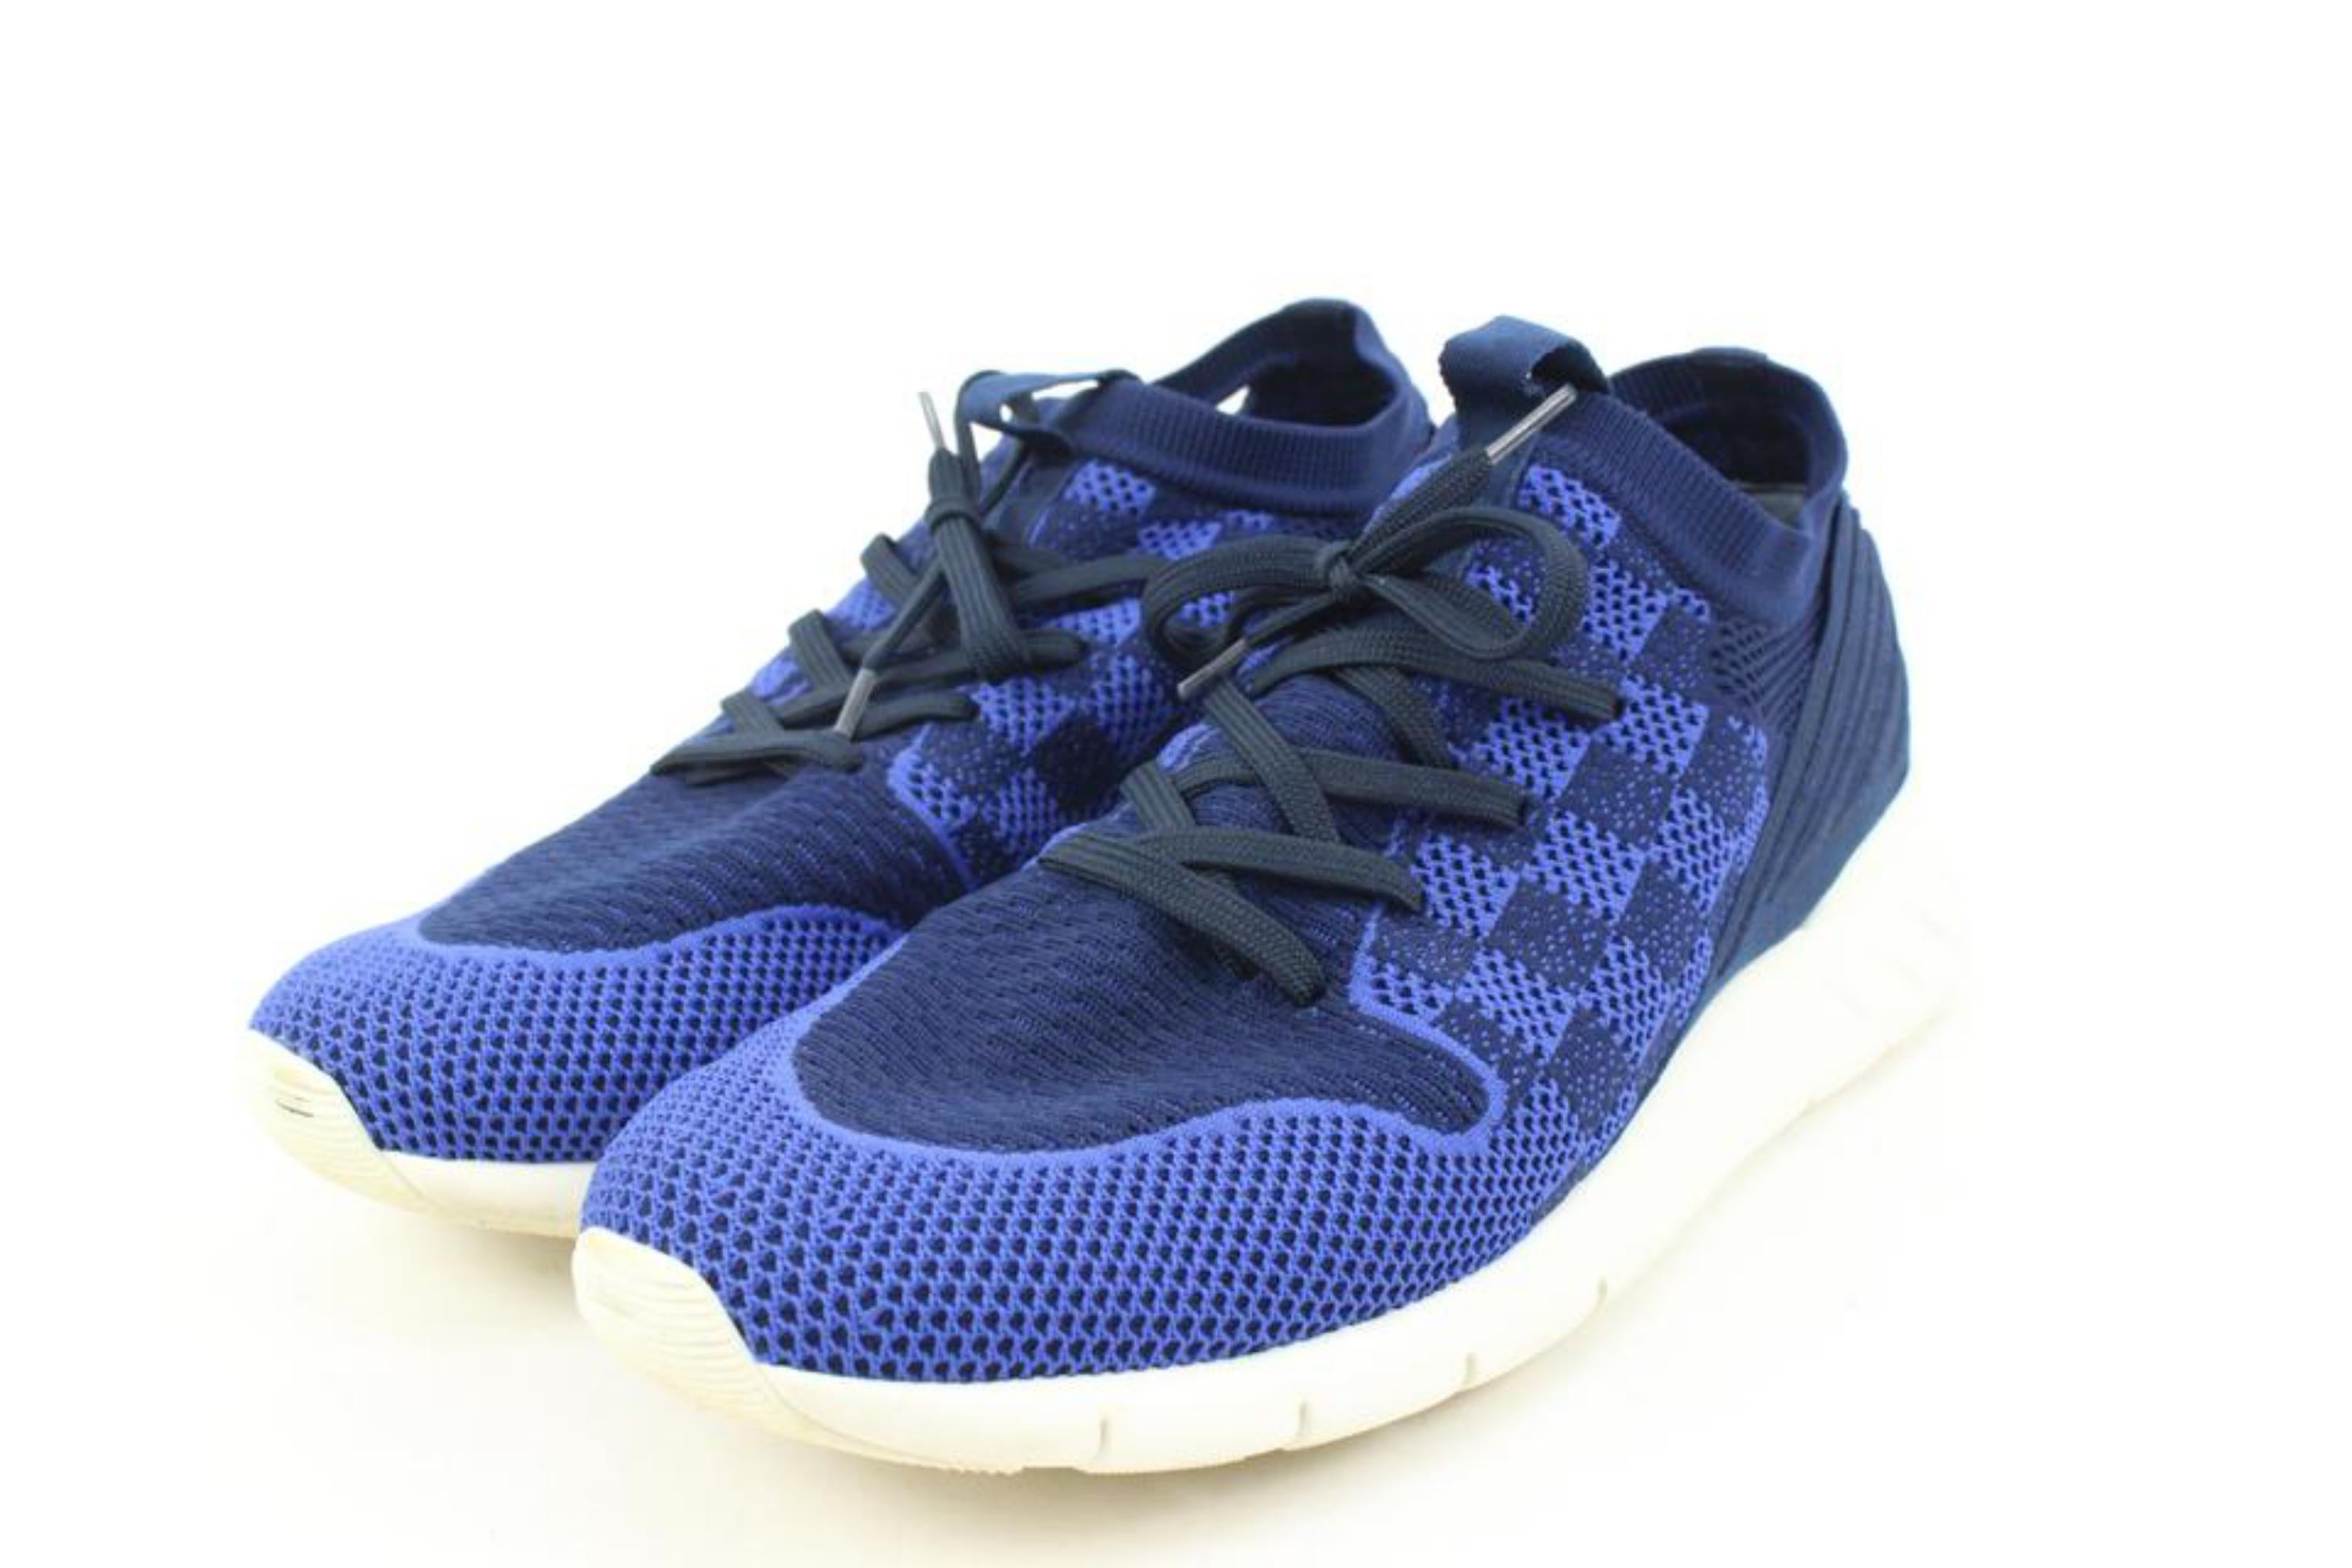 Louis Vuitton Men's 9.5 US Blue Damier Fast Lane Knit Sneakers 29lv21s
Made In: Italy
Measurements: Length:  12.5